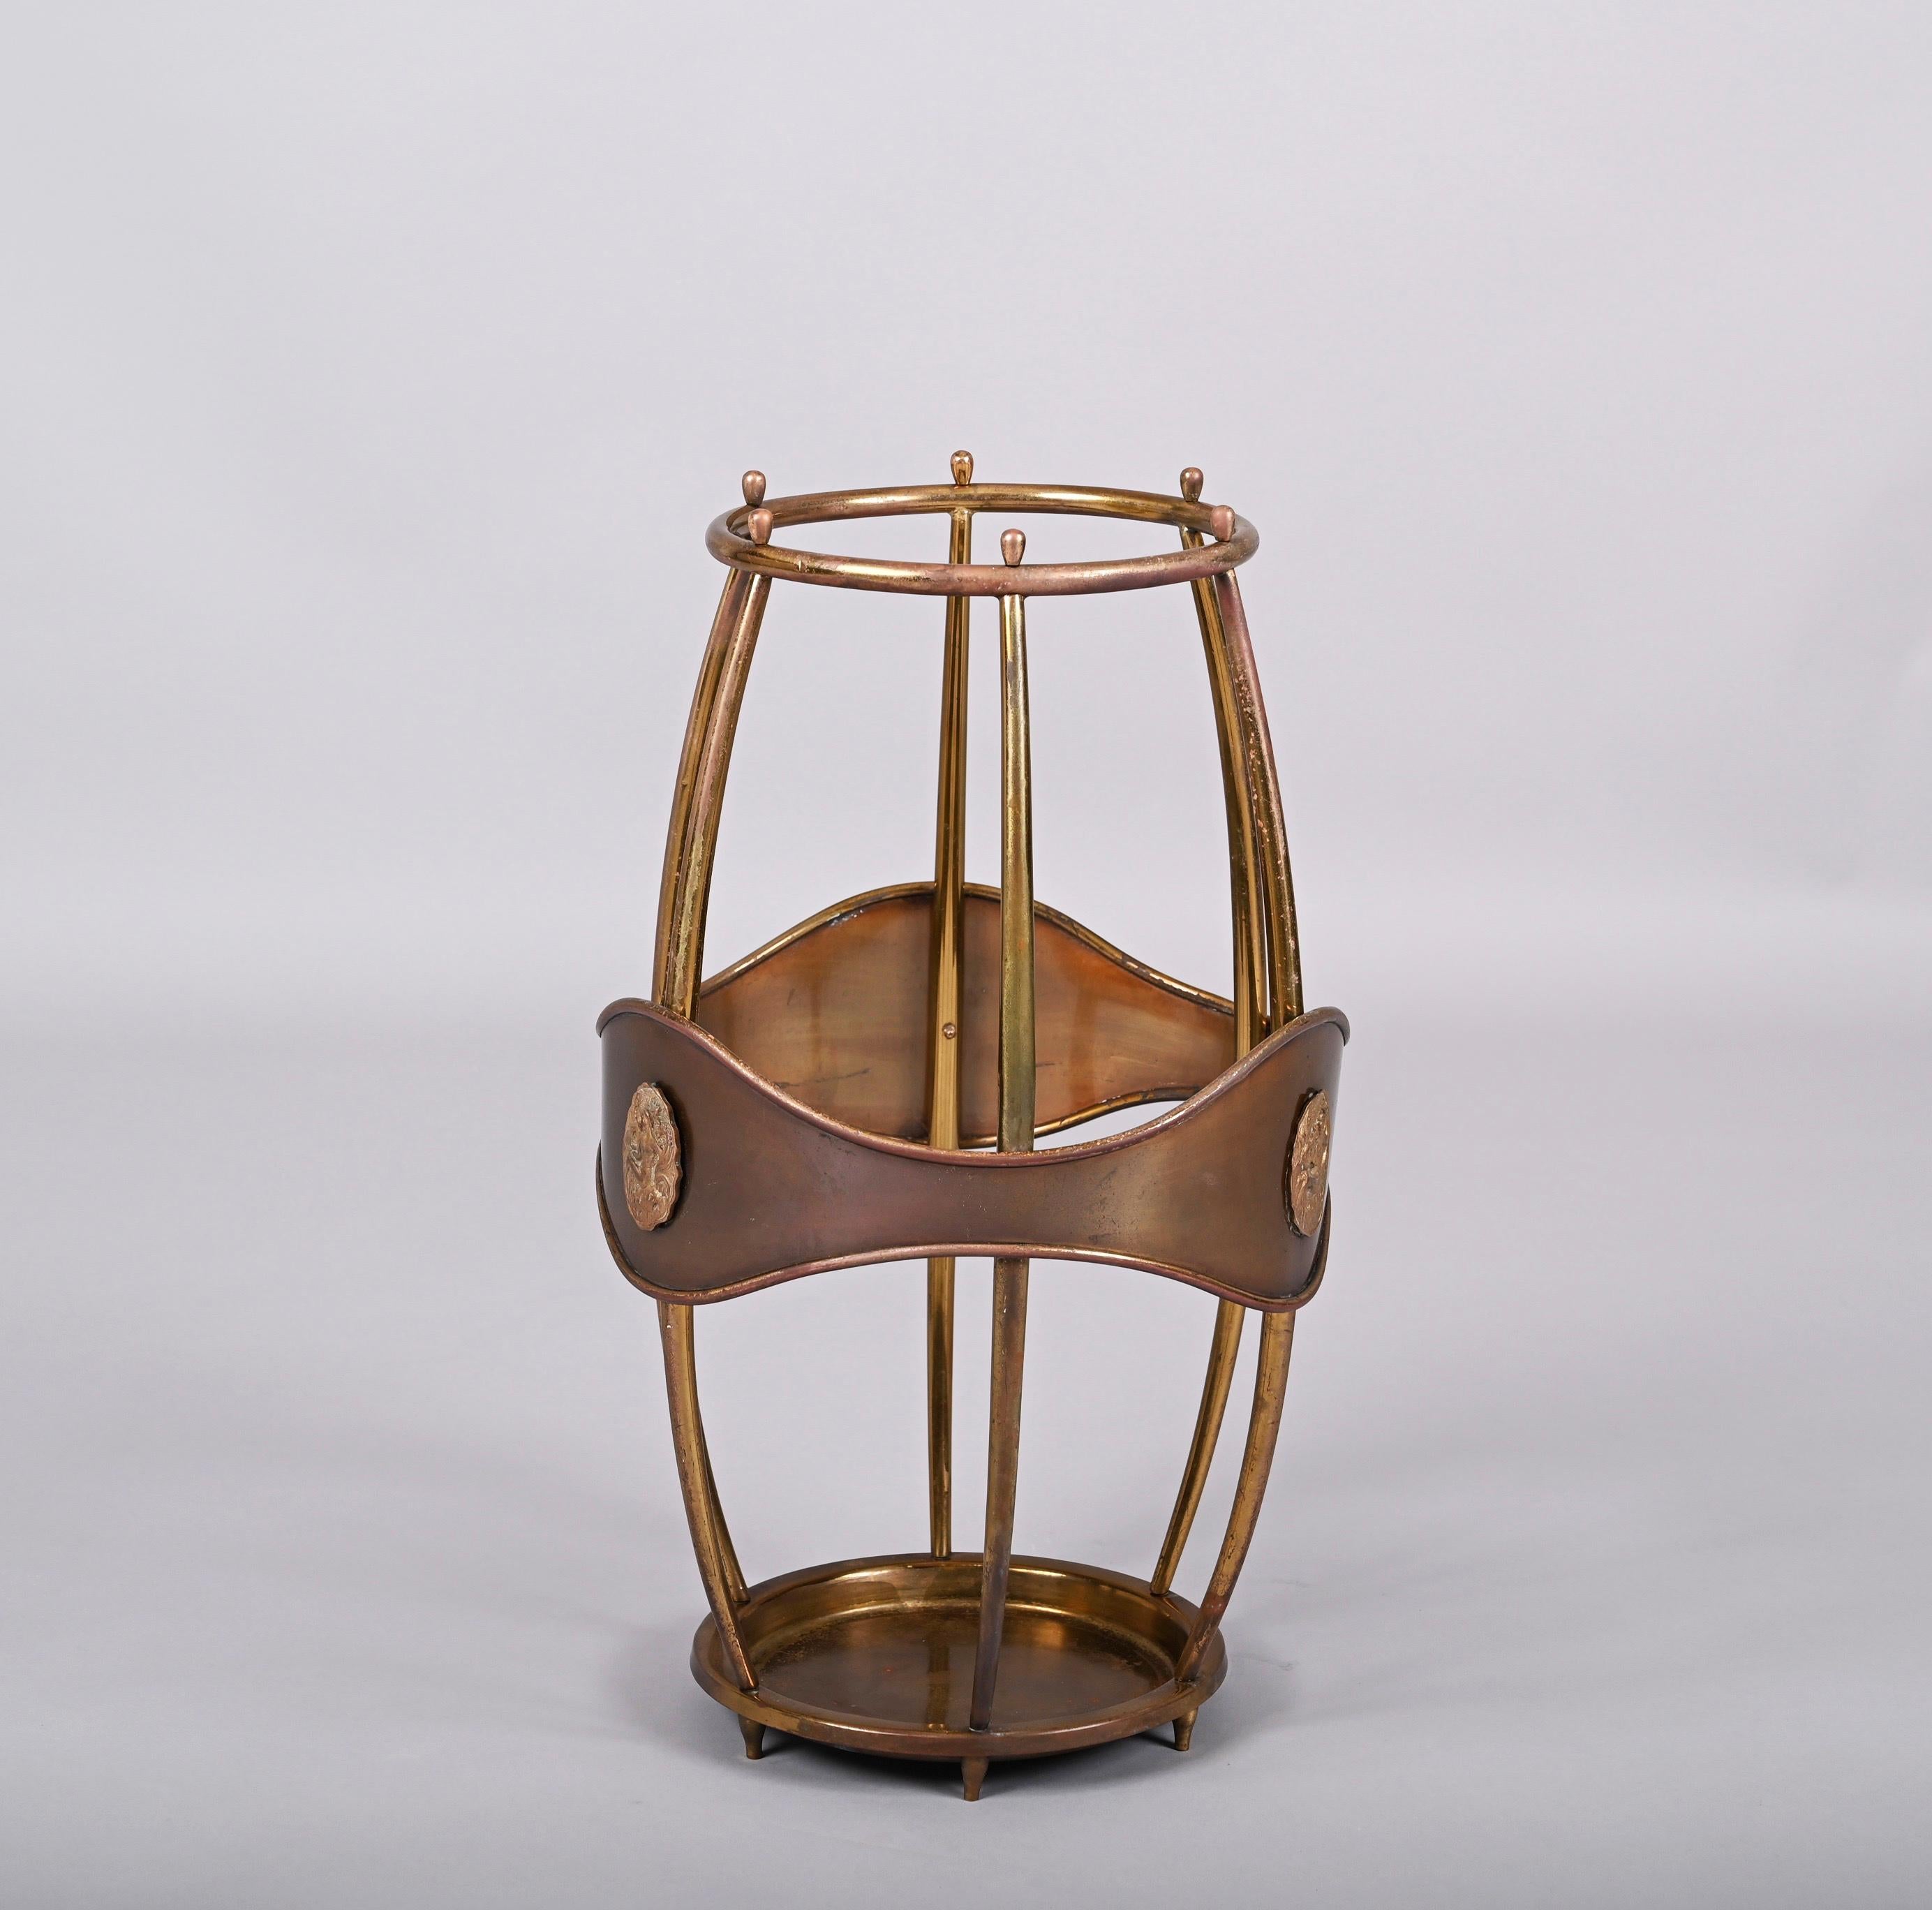 Midcentury Italian Brass Barrell-Shaped Umbrella Stand and Cane Holder, 1950s For Sale 12